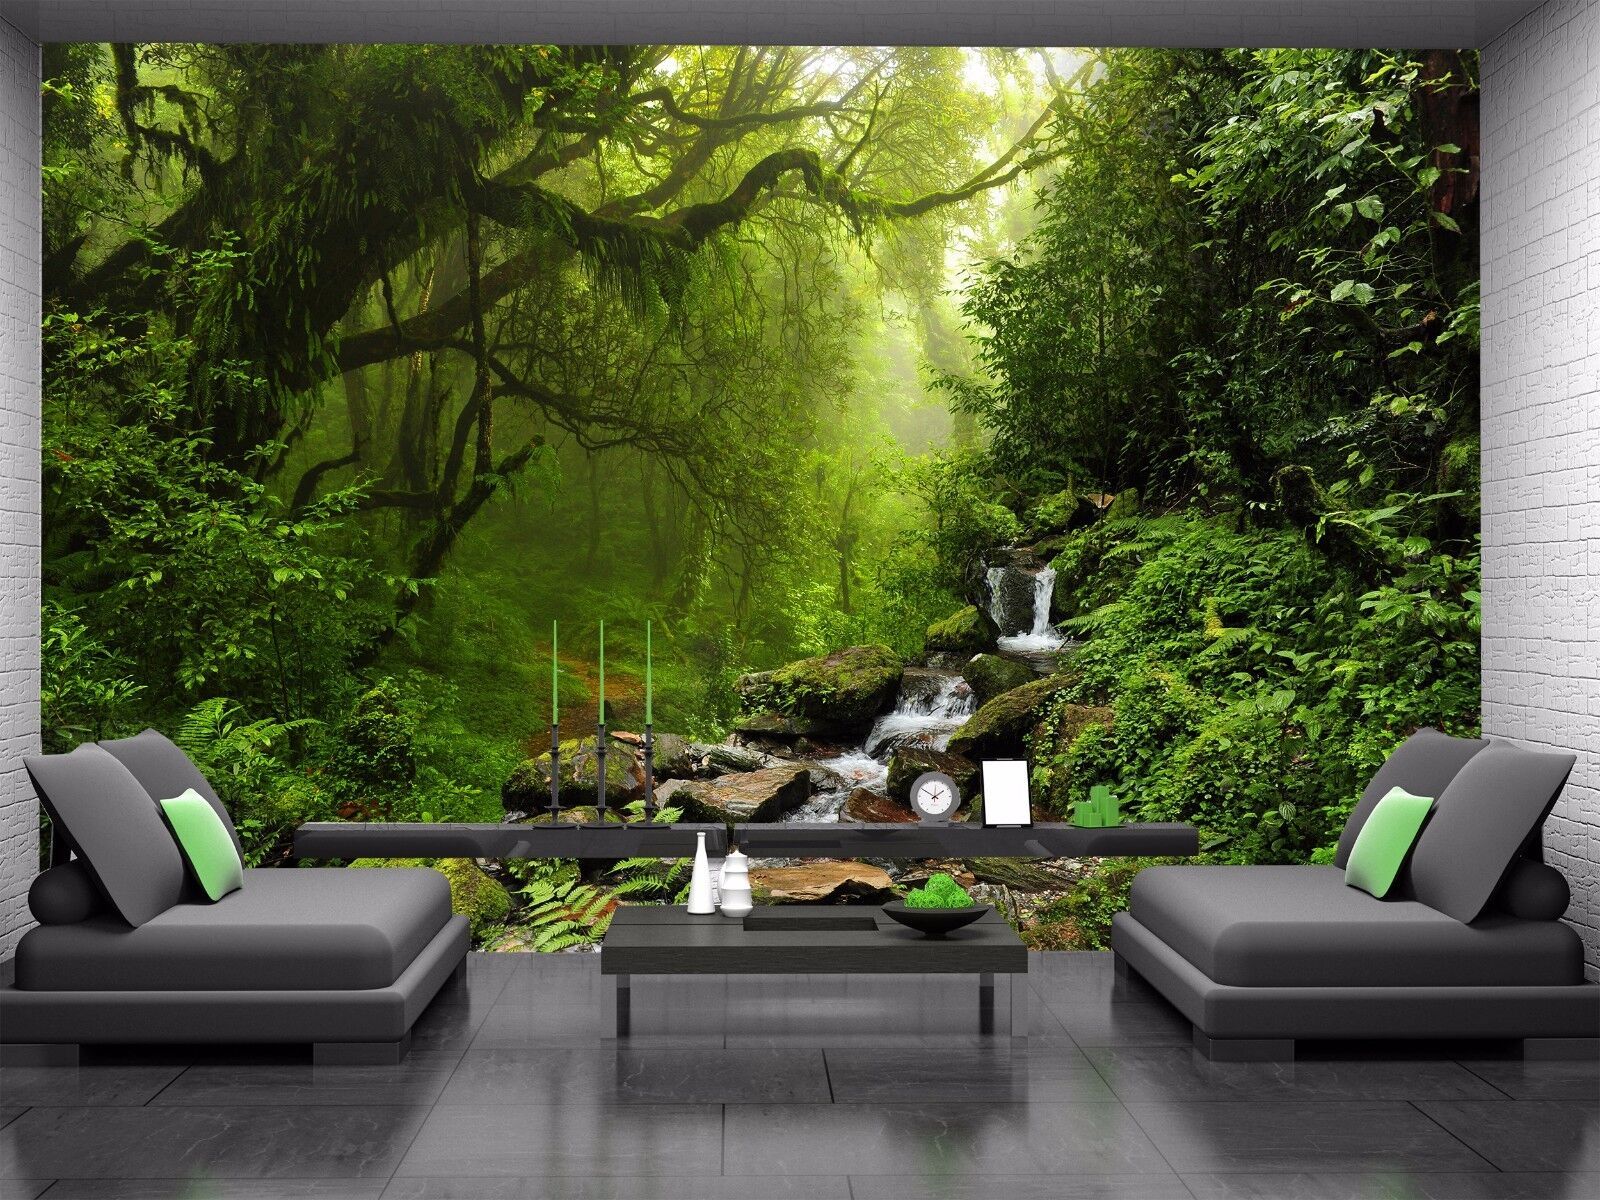 Beautiful Green Forest Photo Wallpaper Wall Mural Decor Paper Poster Wall  Art | Ebay Within Forest Wall Art (View 15 of 15)